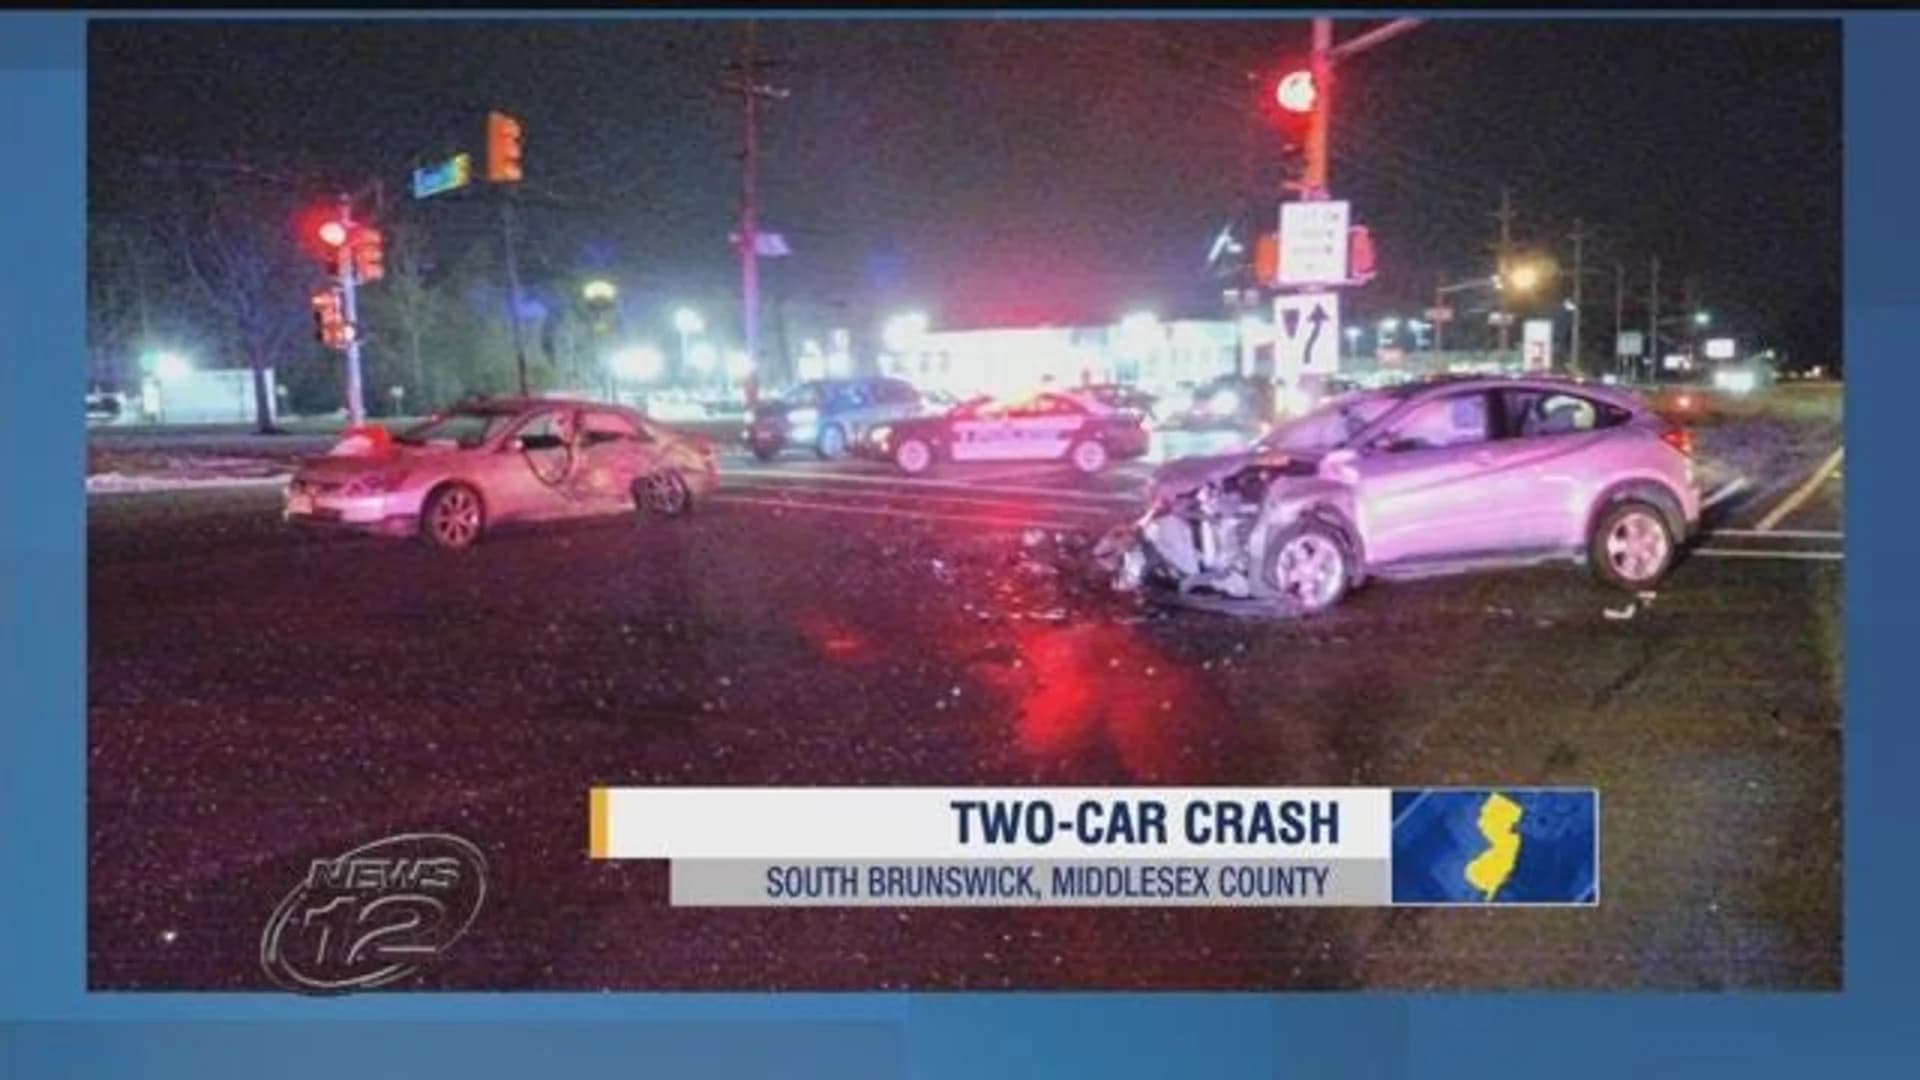 Officials: 2 seriously hurt in South Brunswick crash